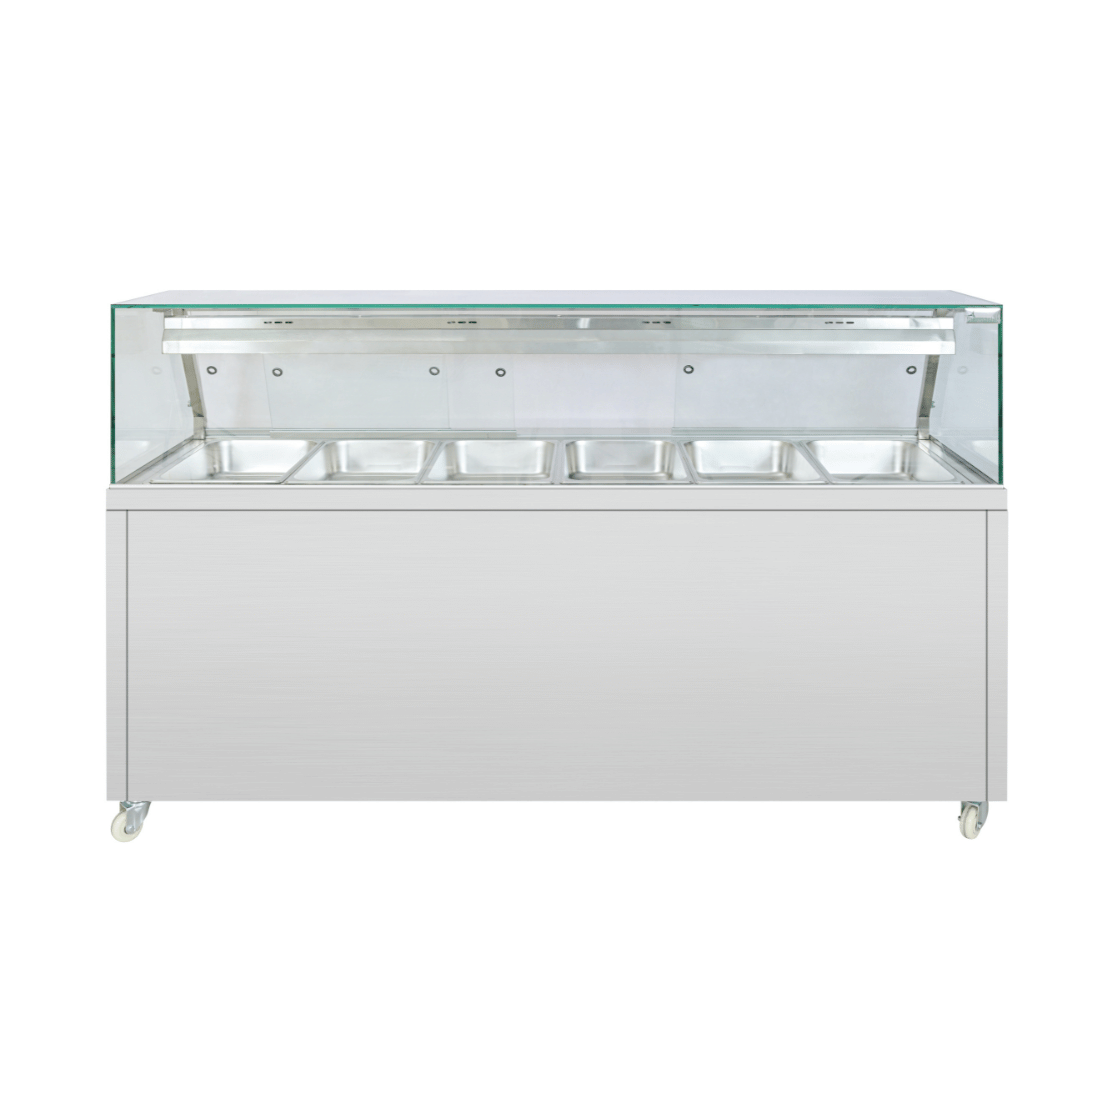 Thermaster Wet and Dry Bain Marie Display 6x1/1 GN Pans PG210FE-XG